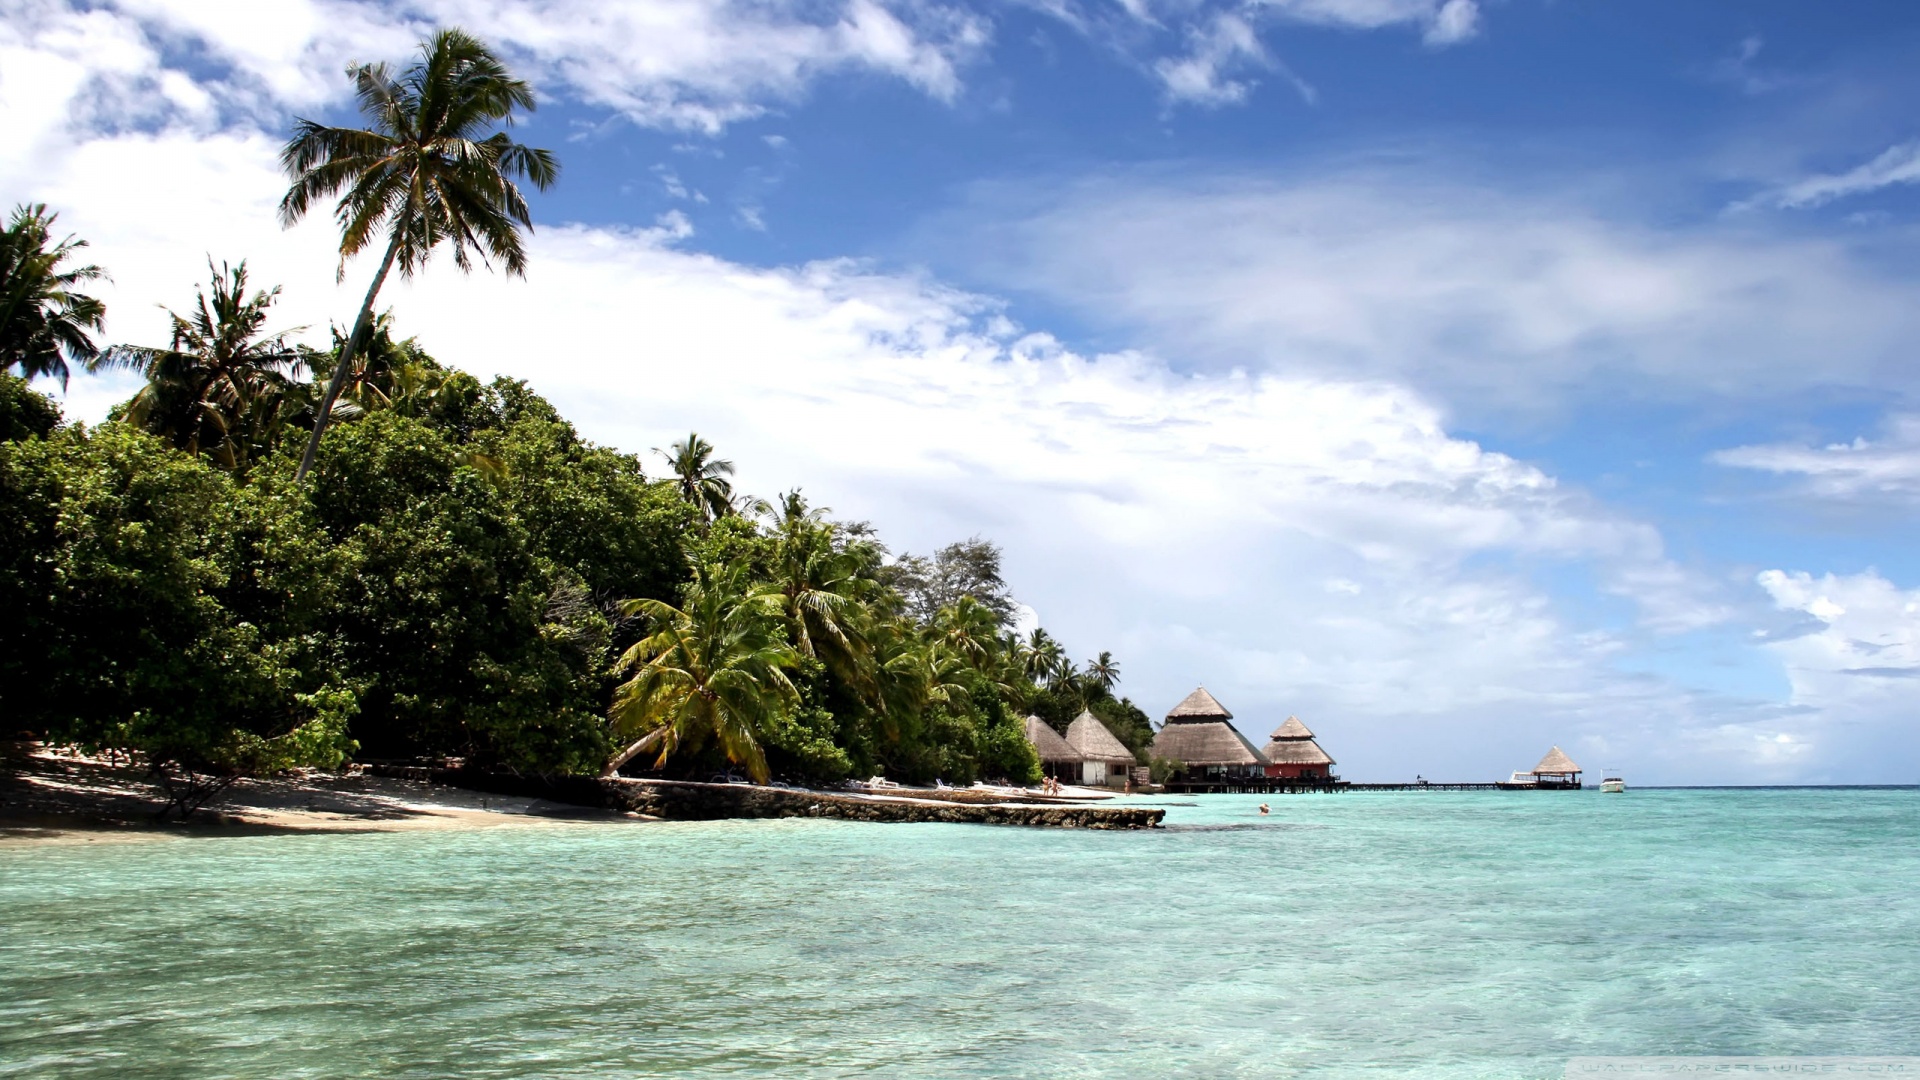 Tropical Island Panorama Wallpaper Pictures Photos Image